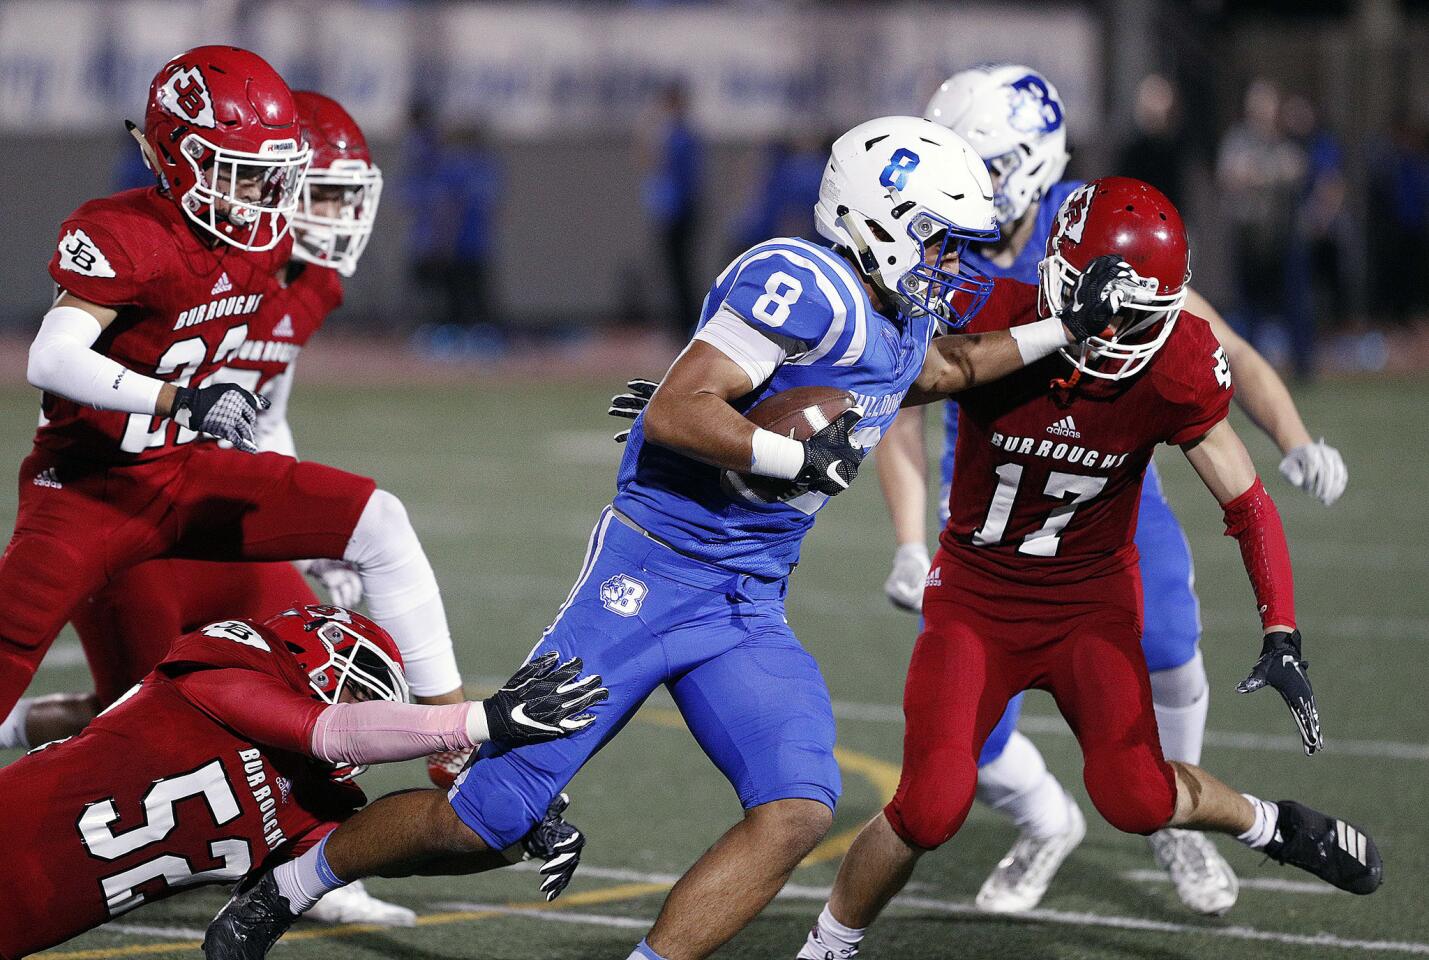 Photo Gallery: Pacific big game rivalry between Burbank and Burroughs football